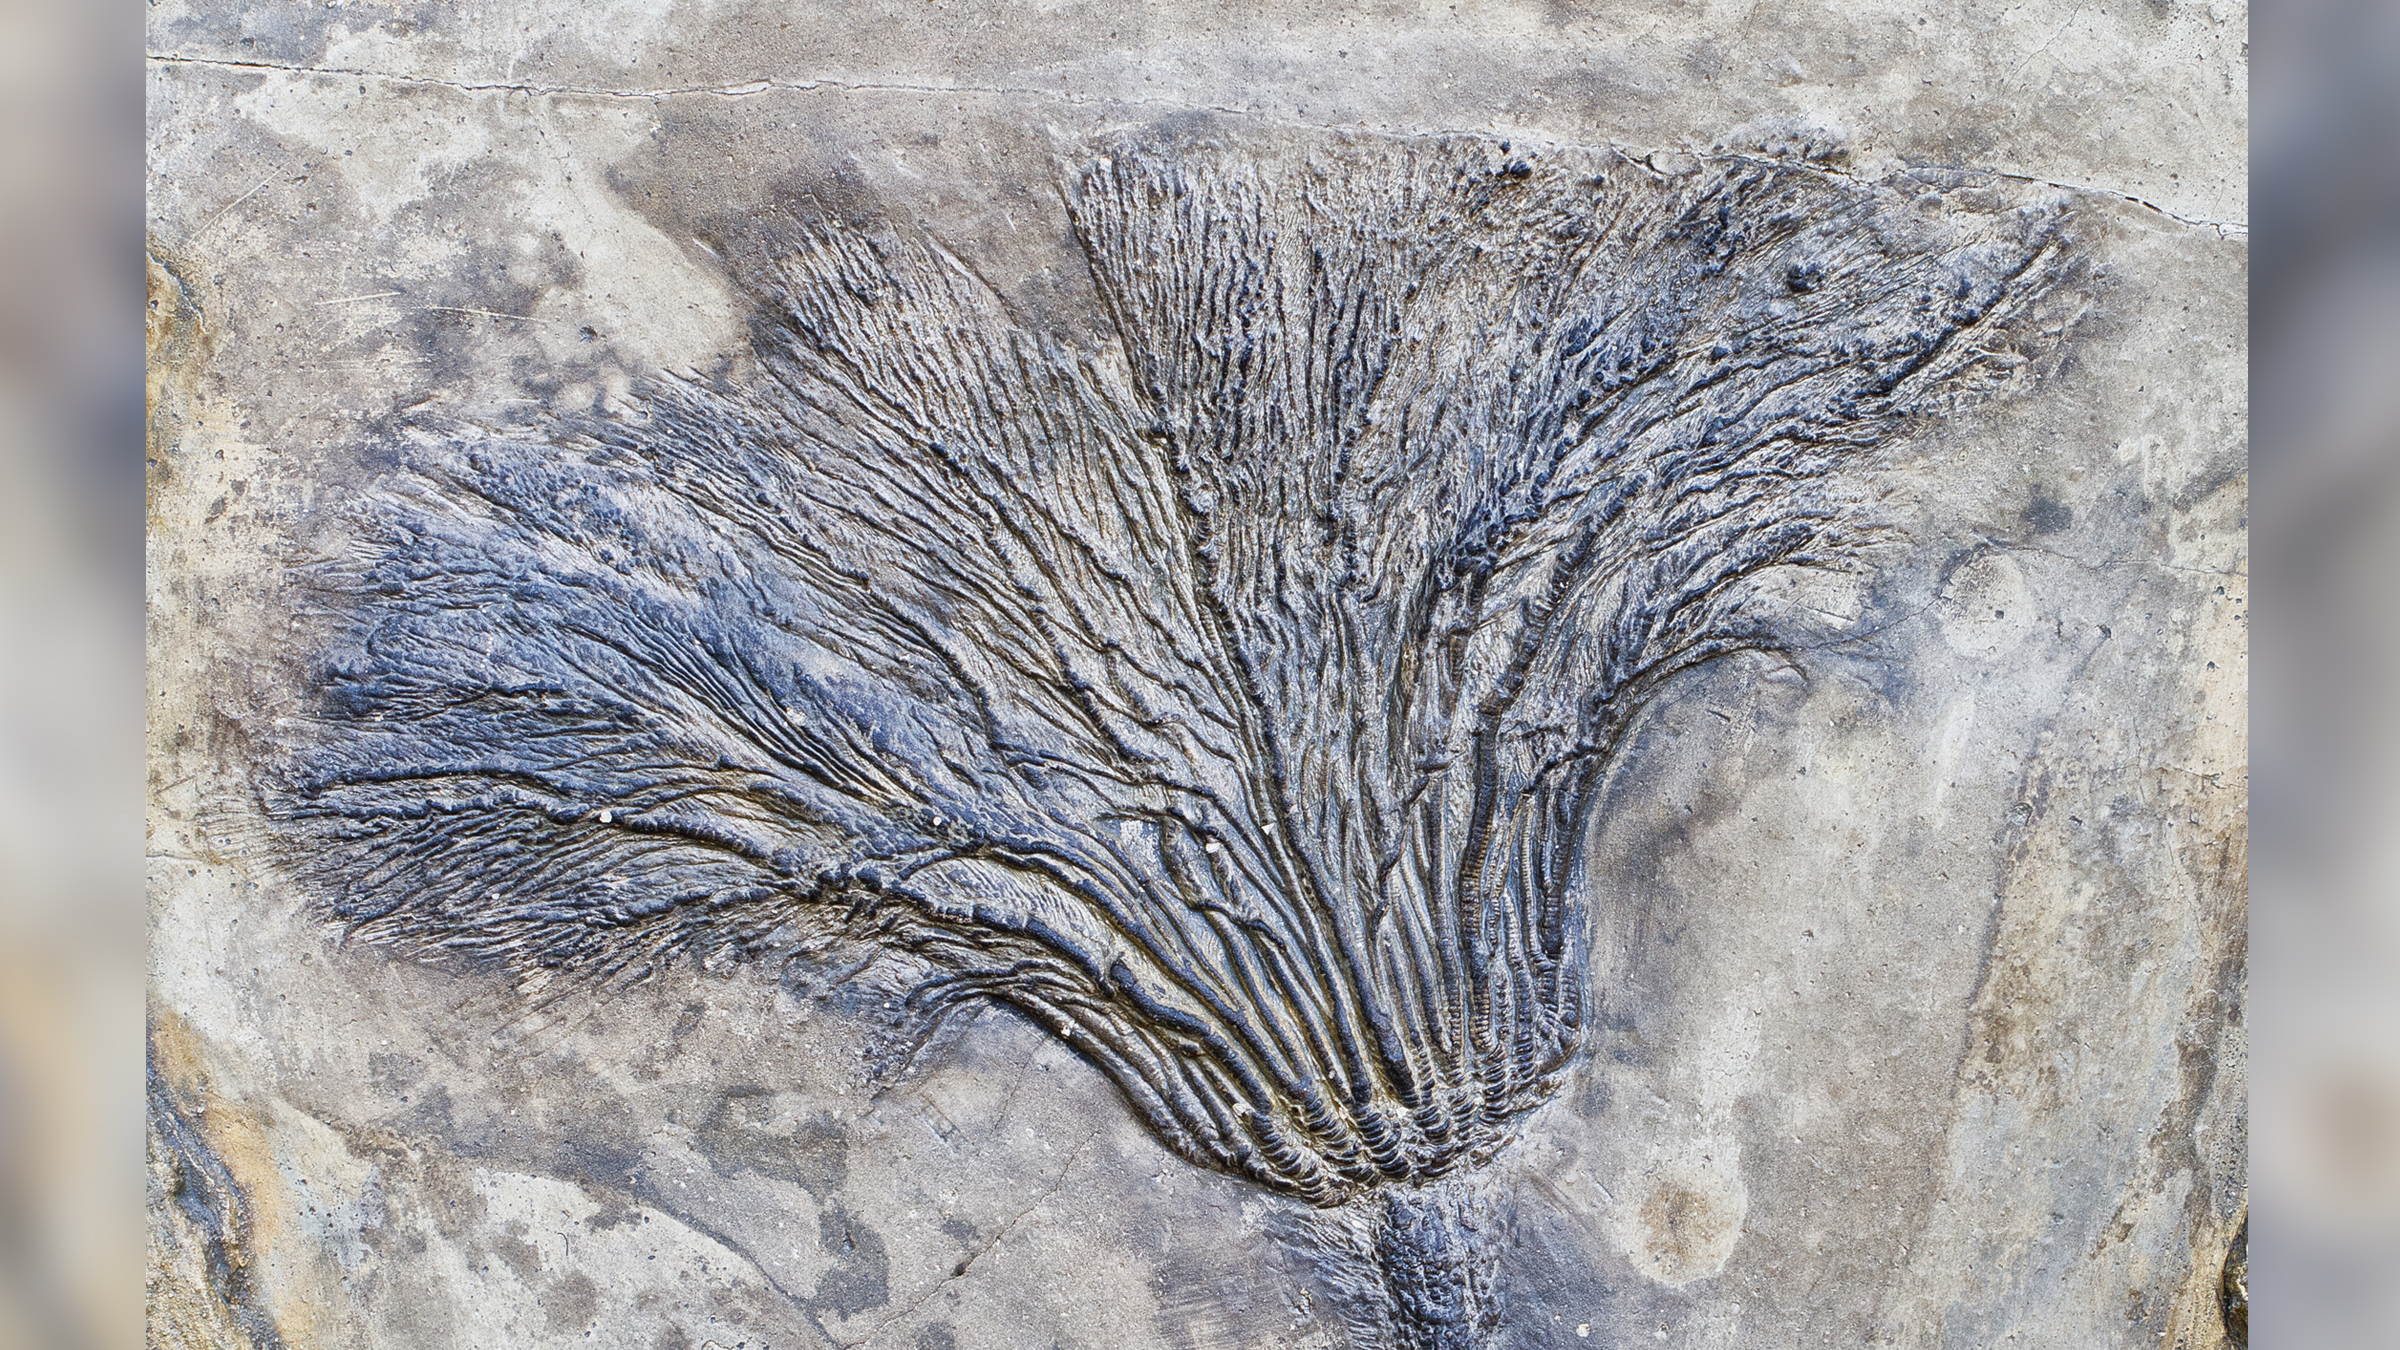  A detailed fossil of an ancient plant, resembling a fern, found in Cairo, New York.